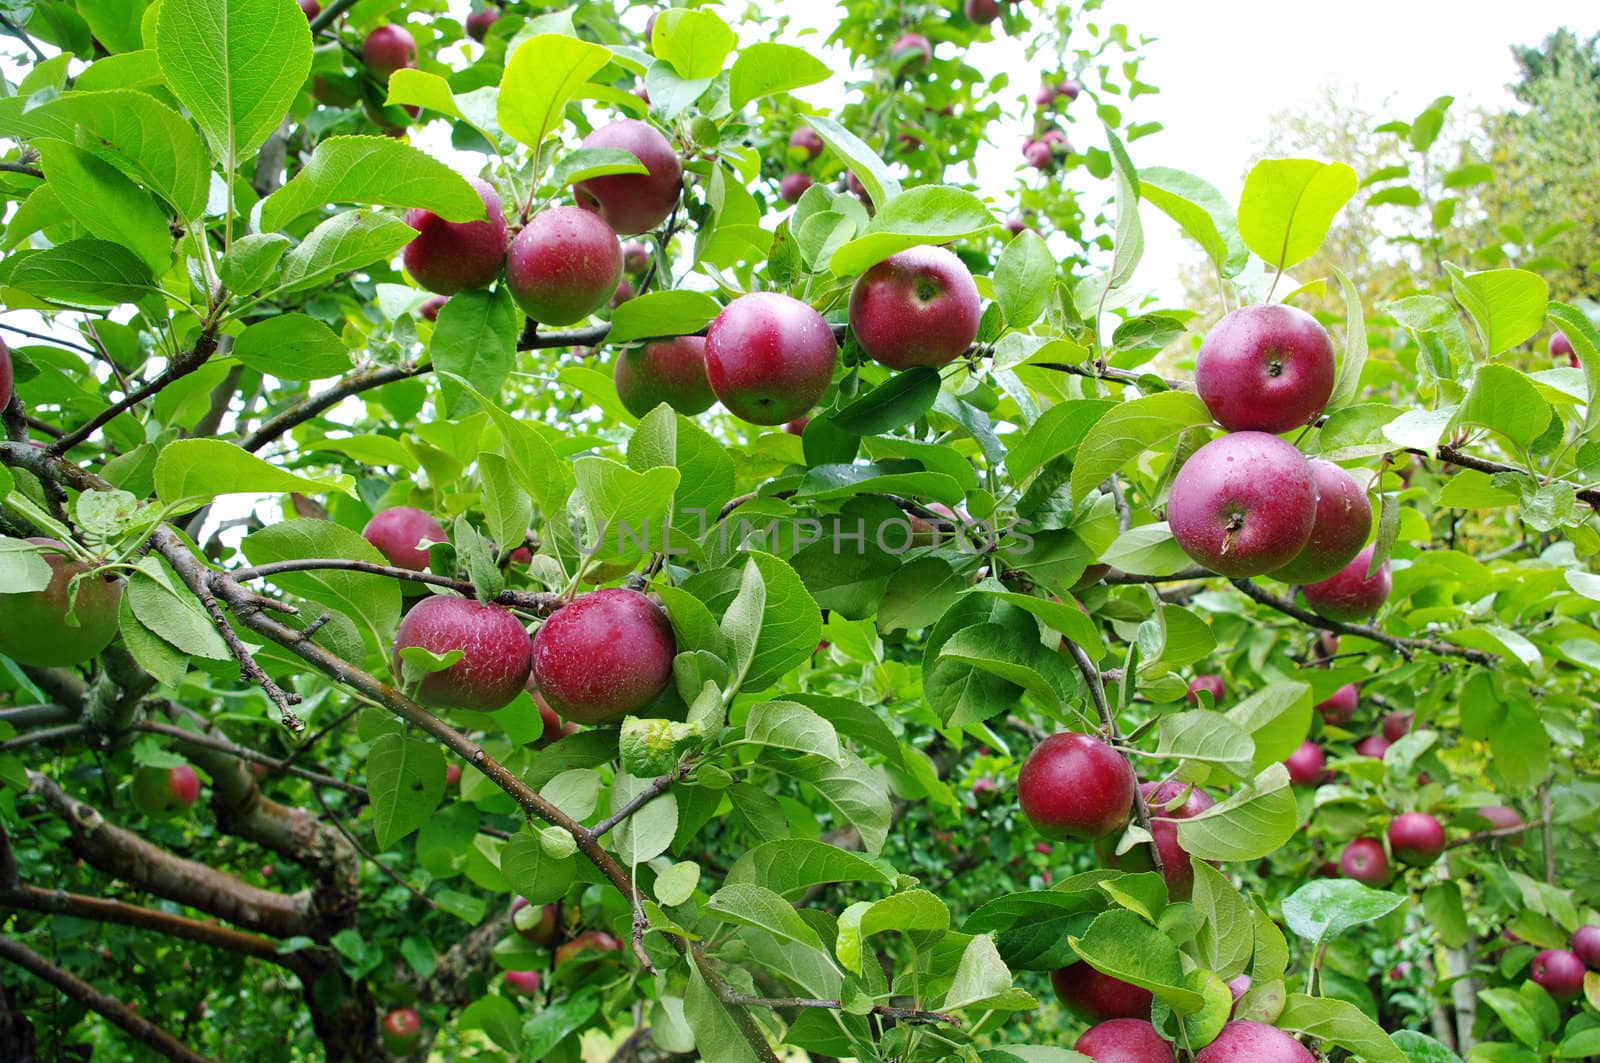 Apples Ready to Pick by edcorey